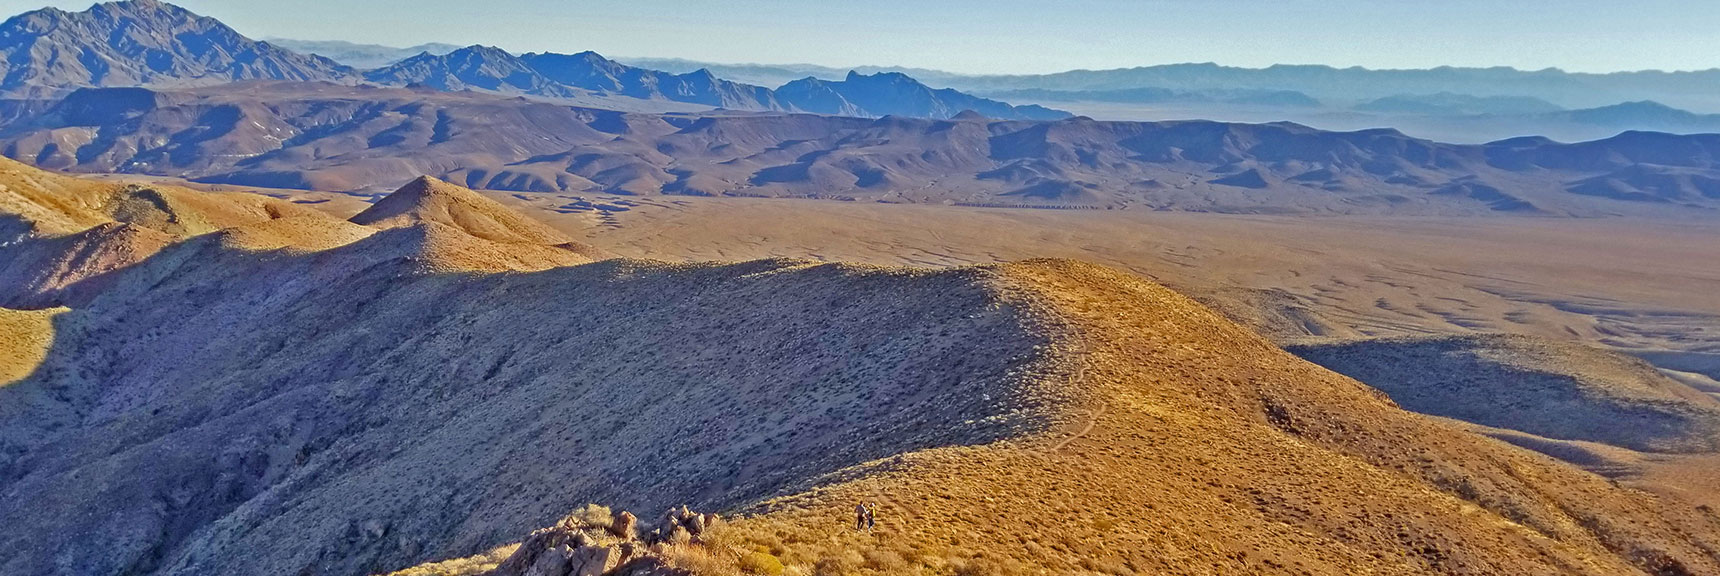 View South Along Dante's Ridge from Near Mt. Perry Summit | Dante's View to Mt. Perry | Death Valley National Park, CA